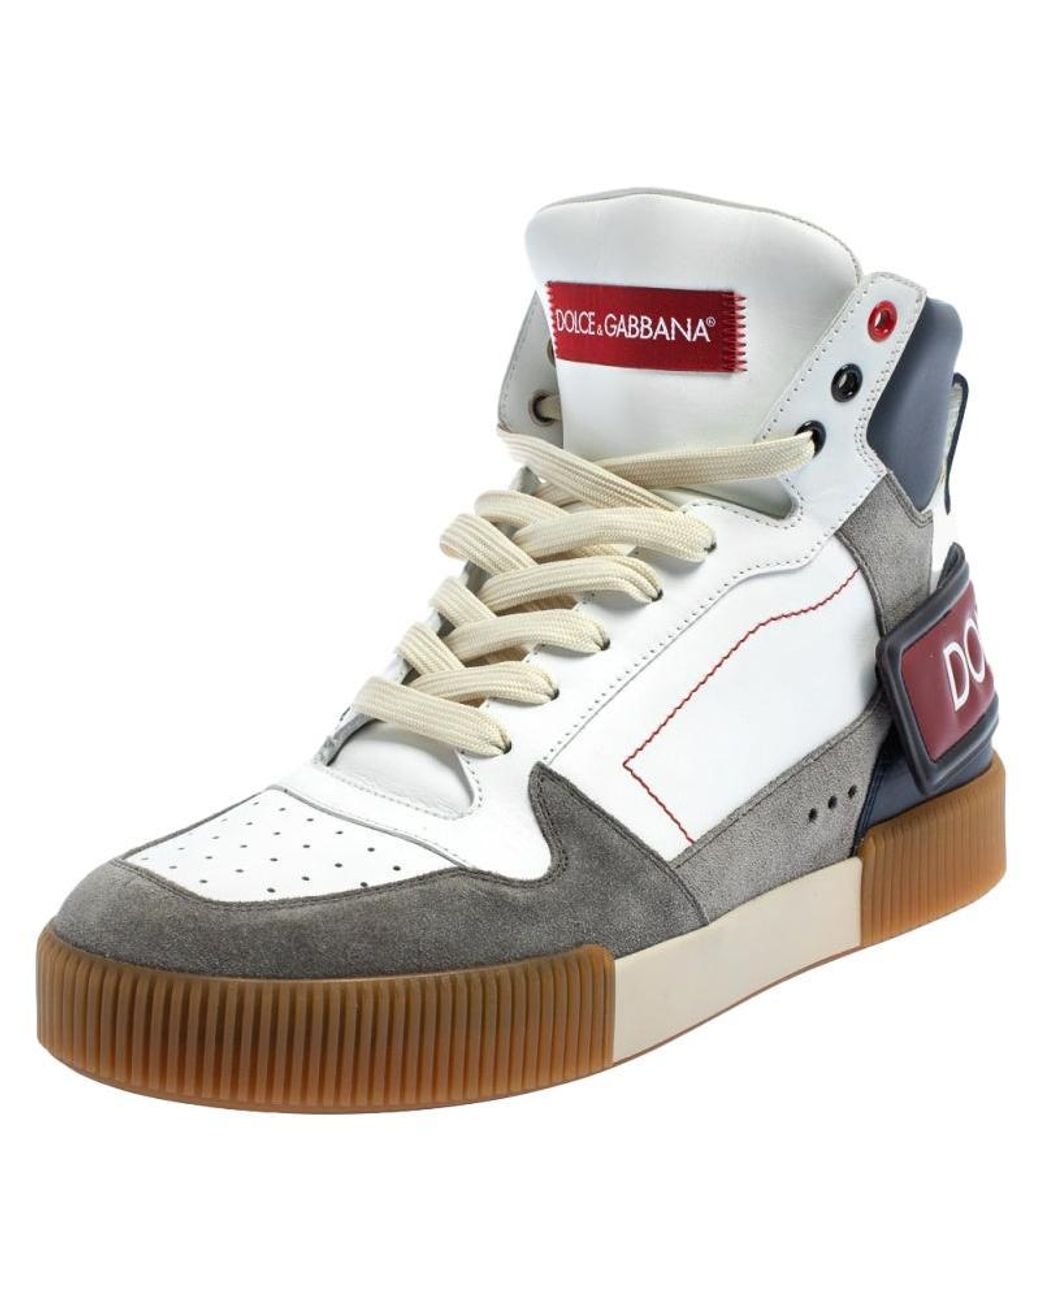 Dolce & Gabbana White/grey Leather And Suede High Top Sneakers Size 42 ...